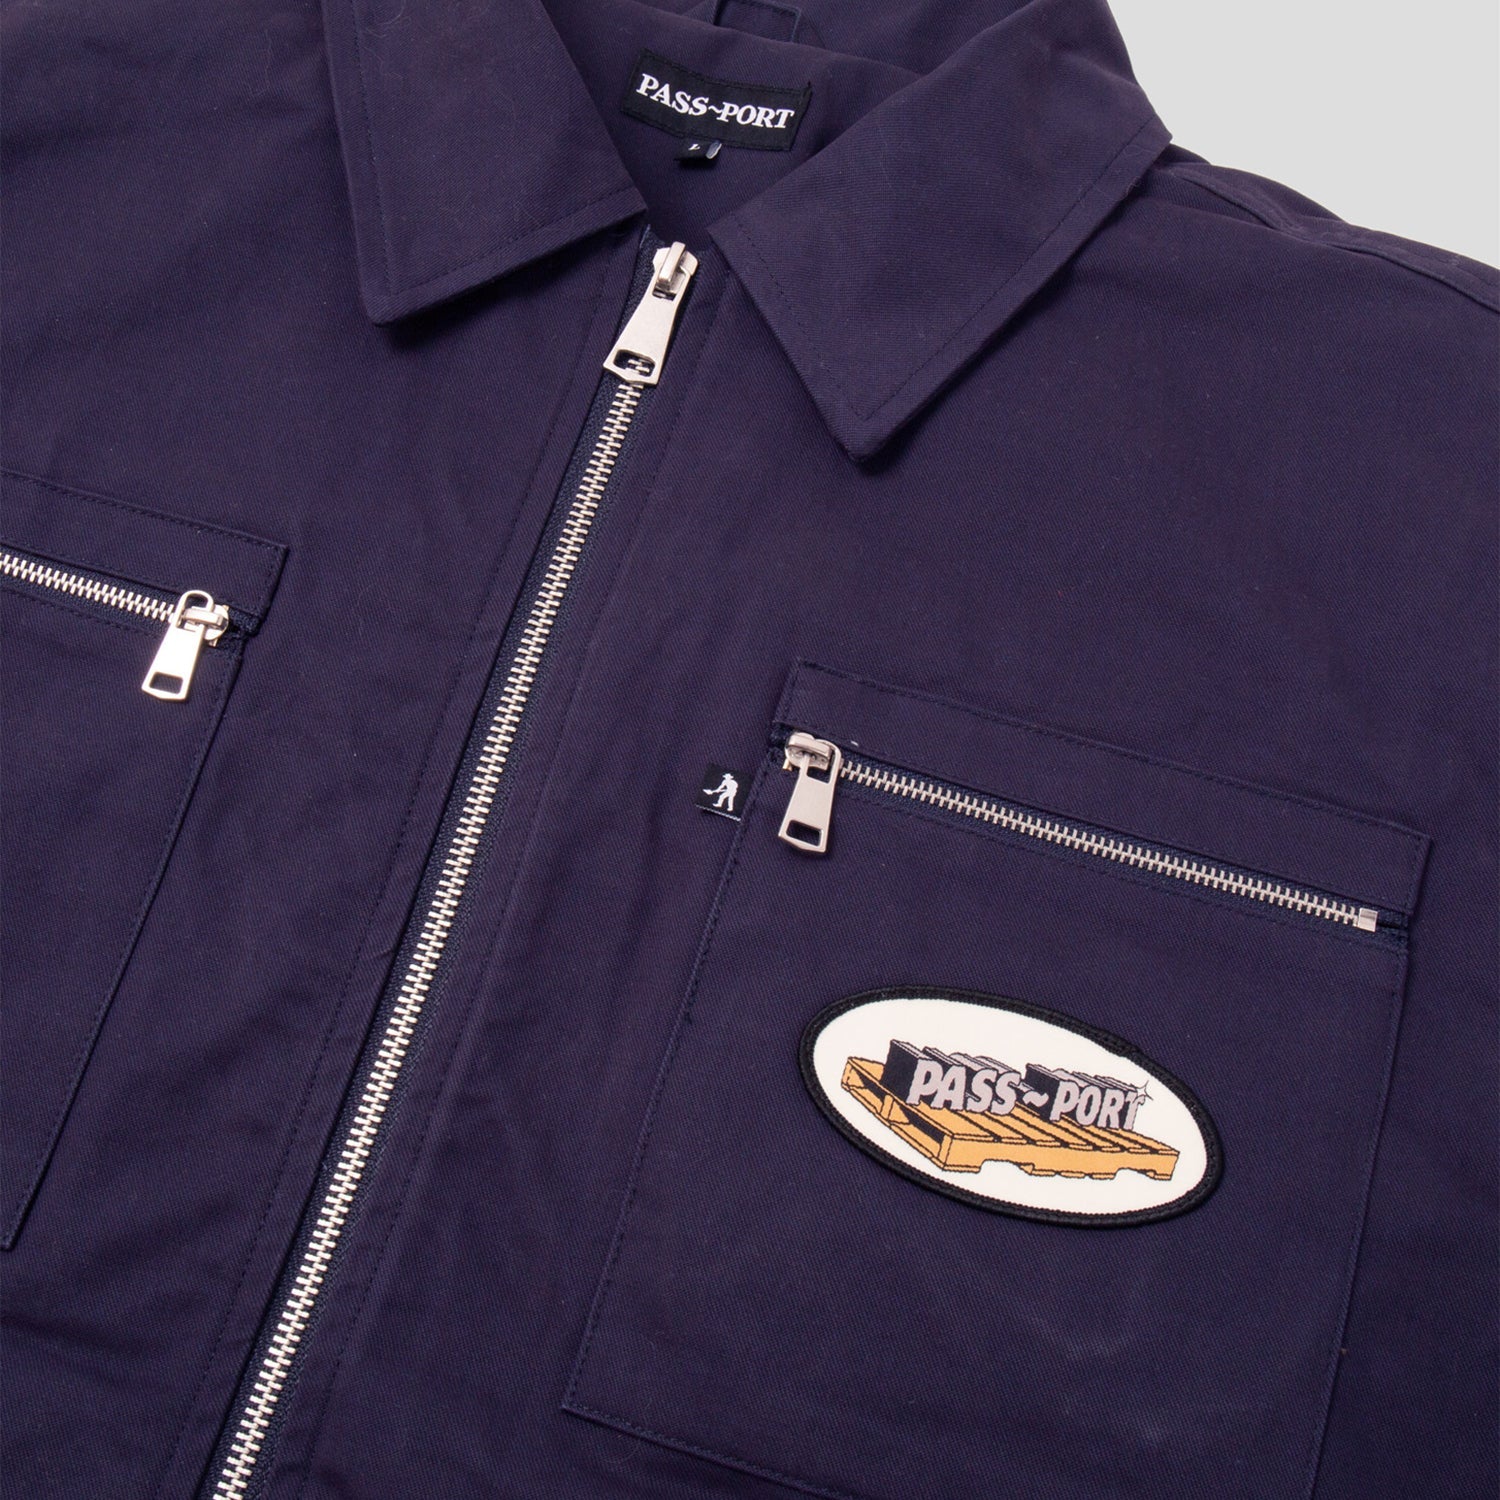 PASS~PORT "DELIVERY" JACKET NAVY